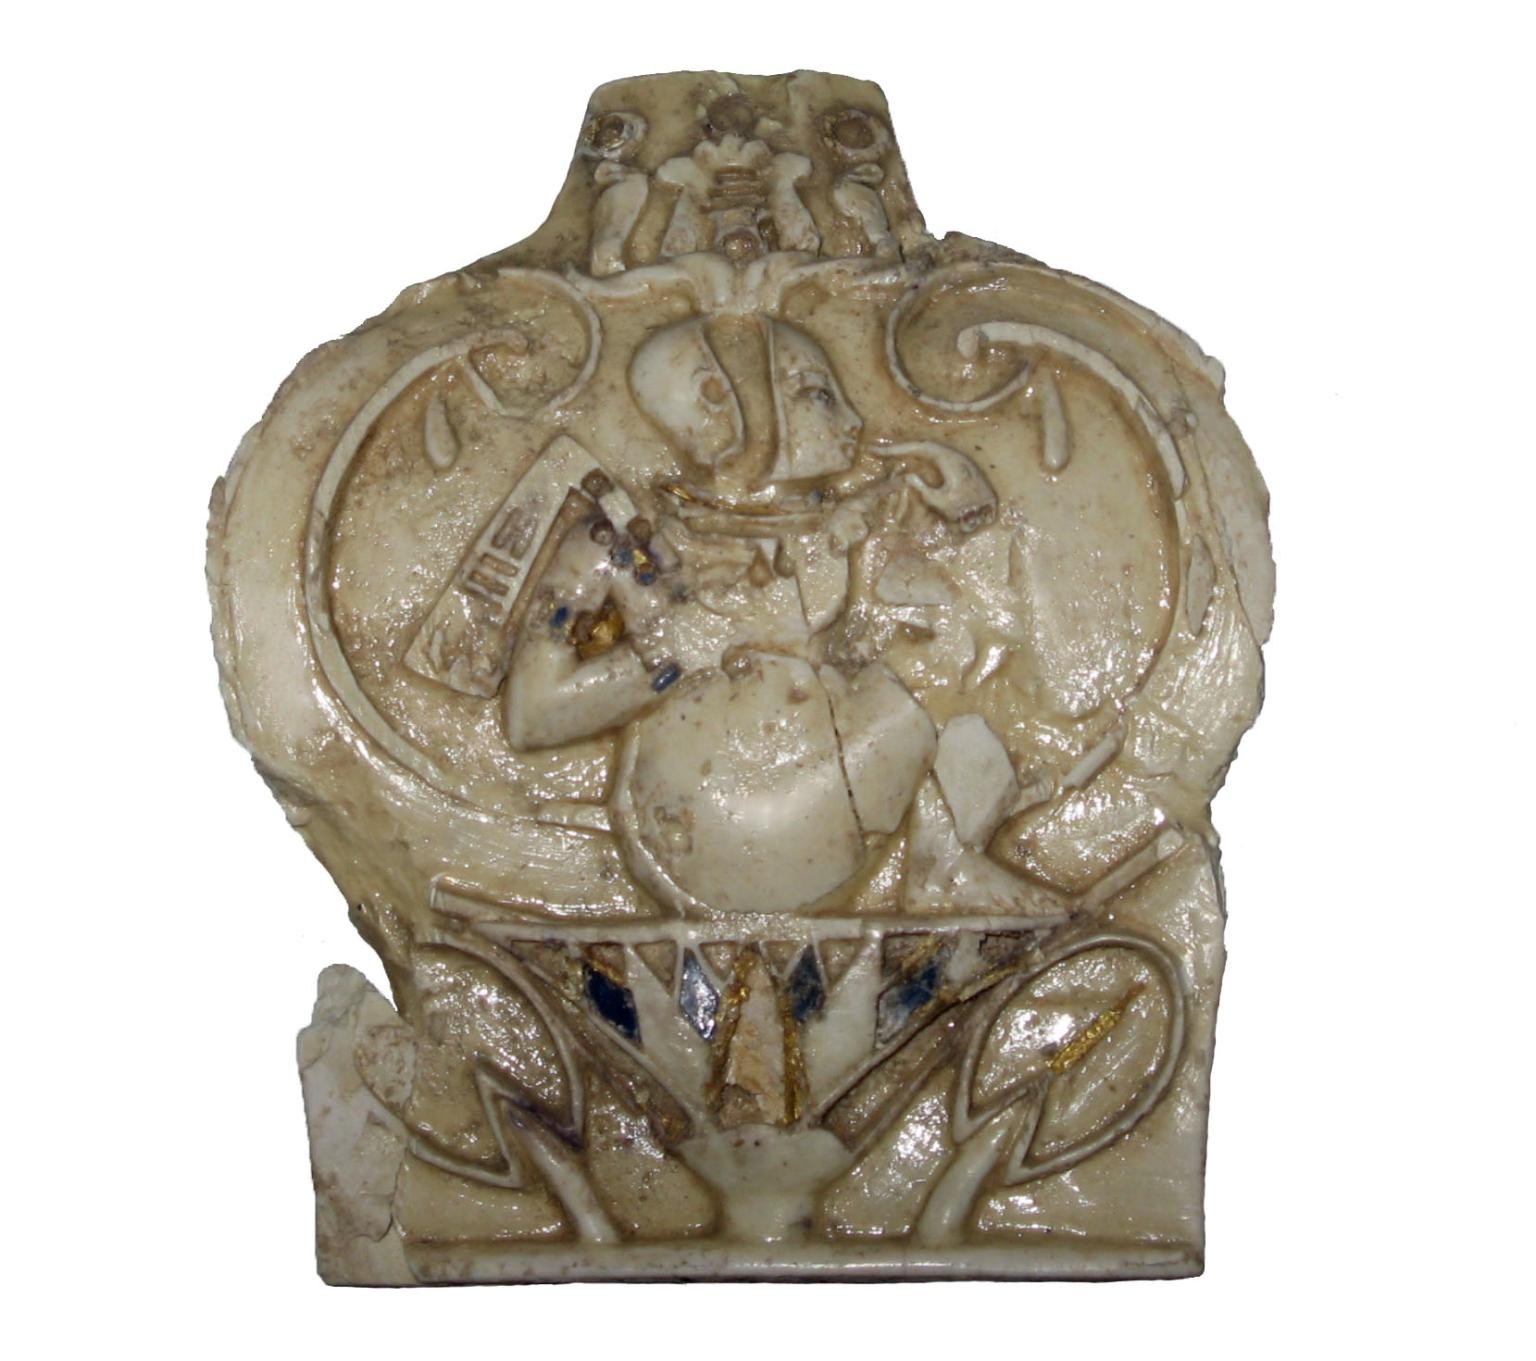 Carved leaf-shaped ivory relief of child sitting on a lotus flower.